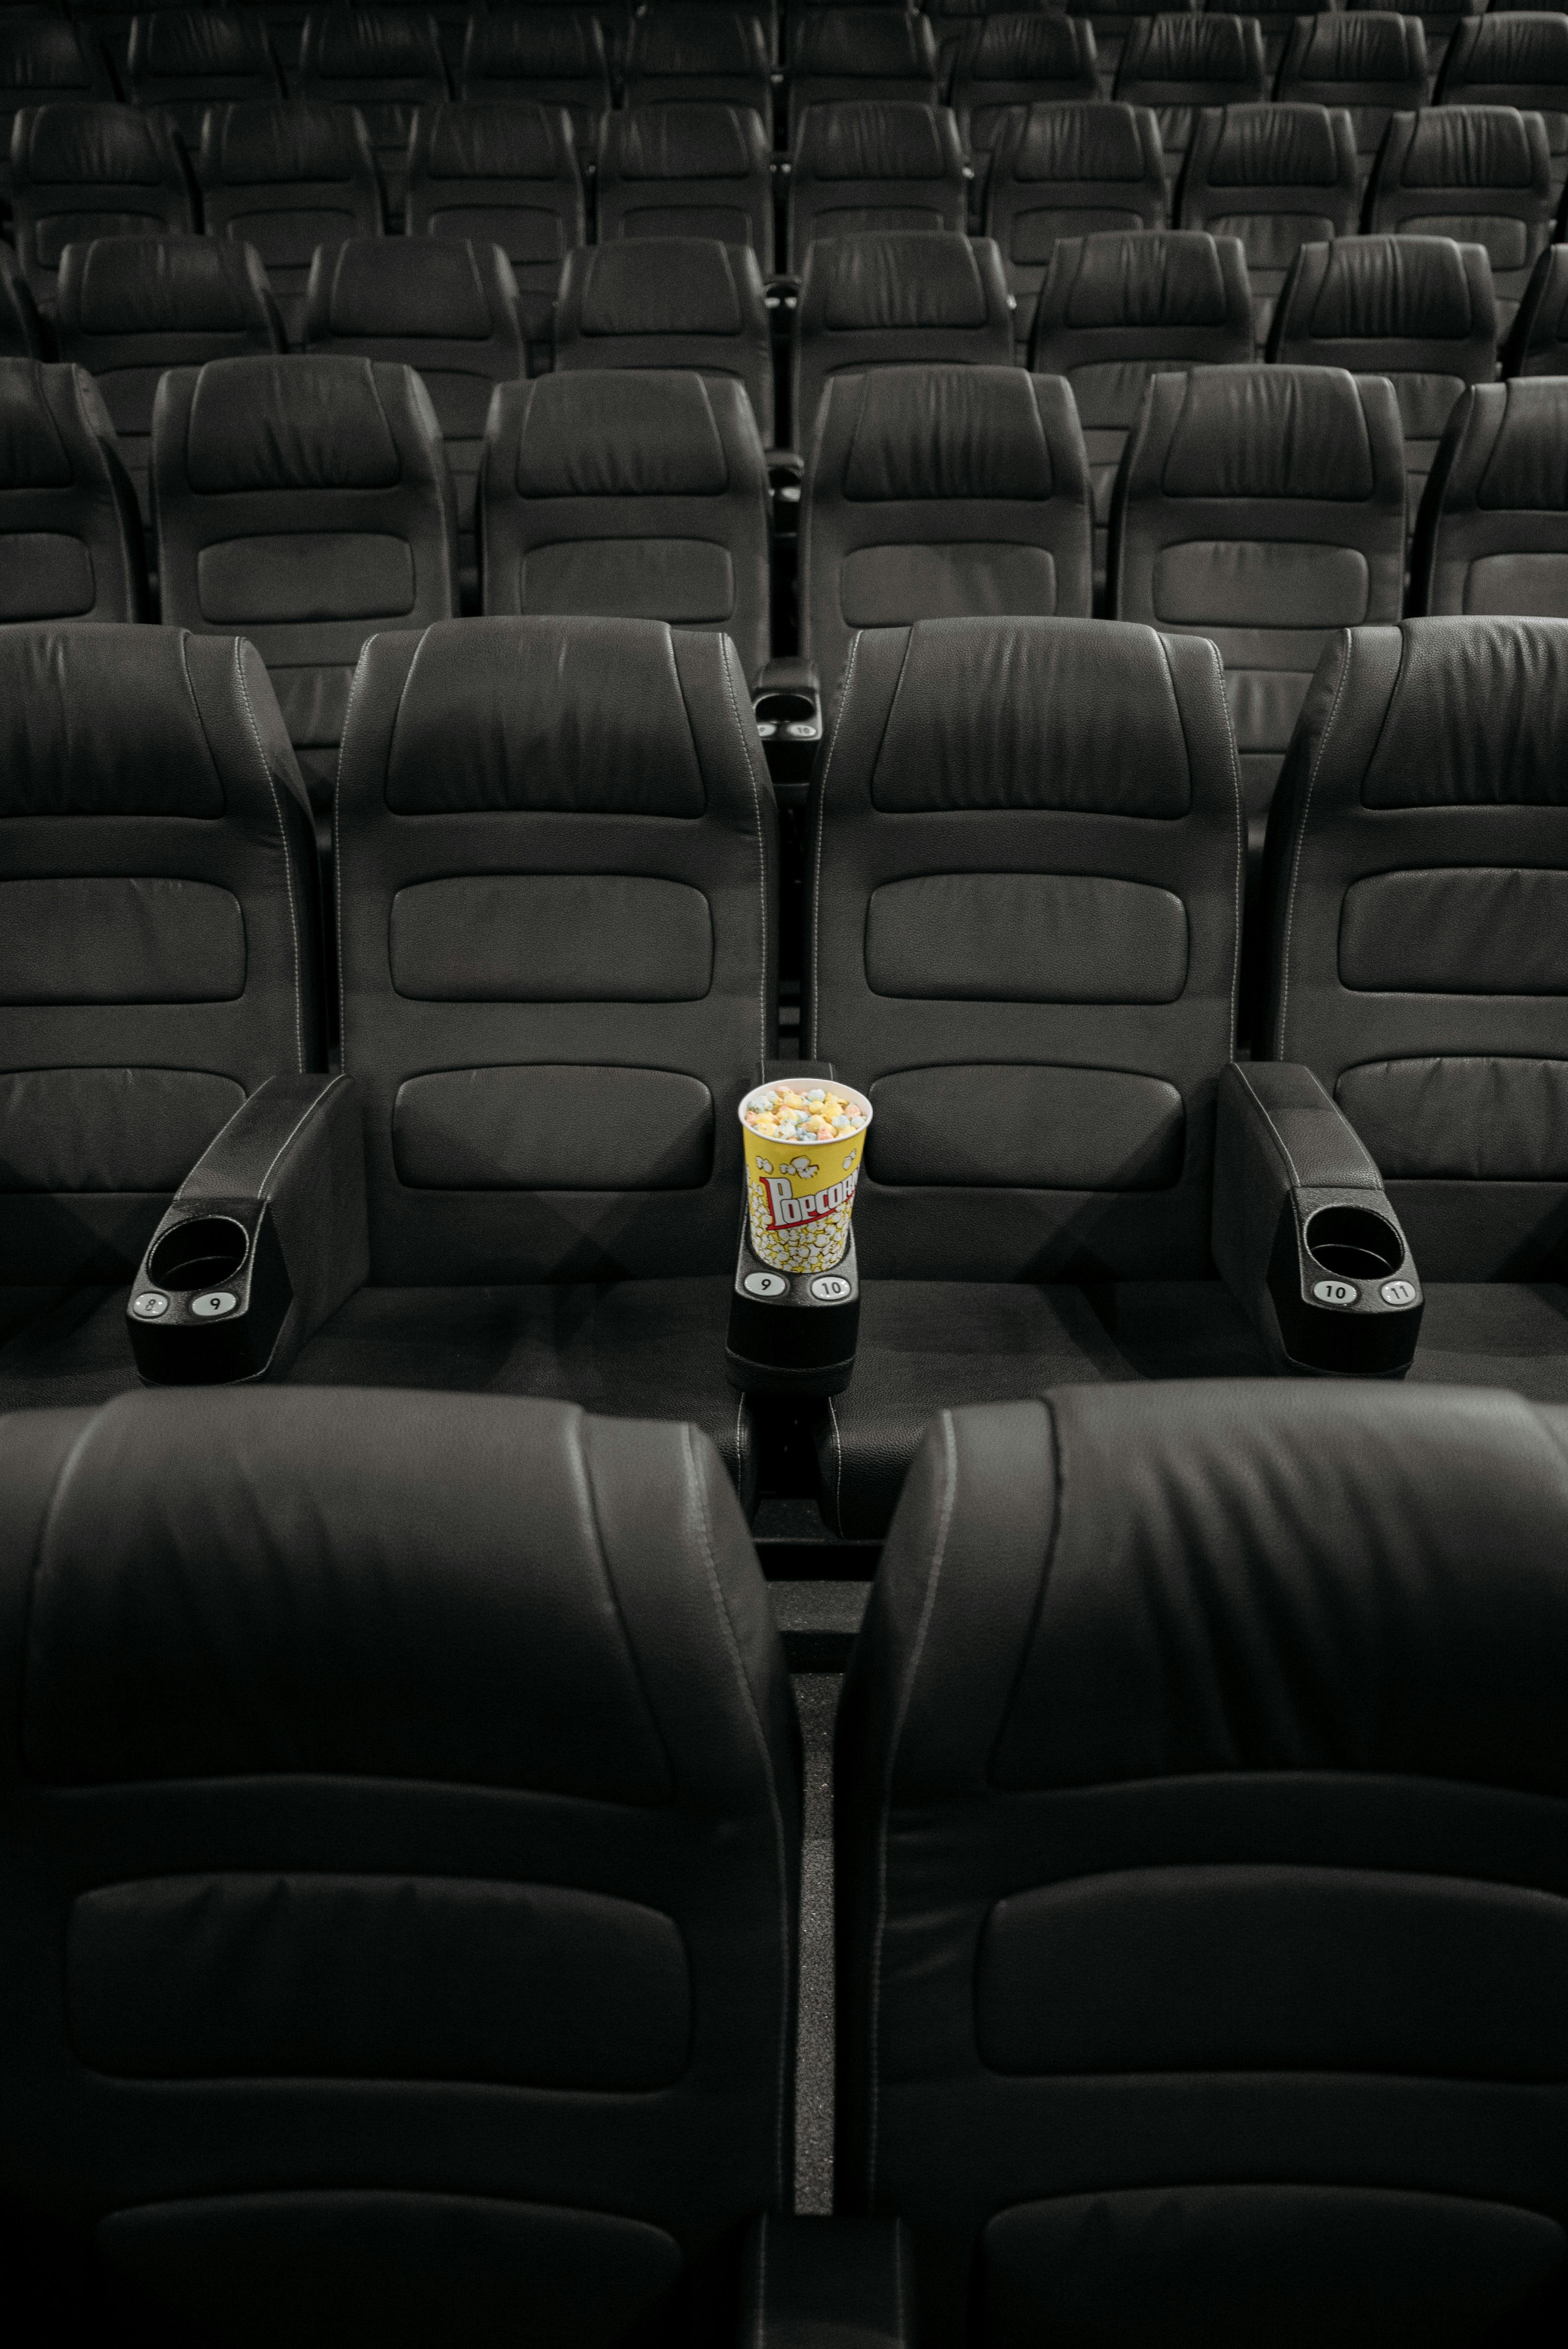 lined up black leather cinema seats